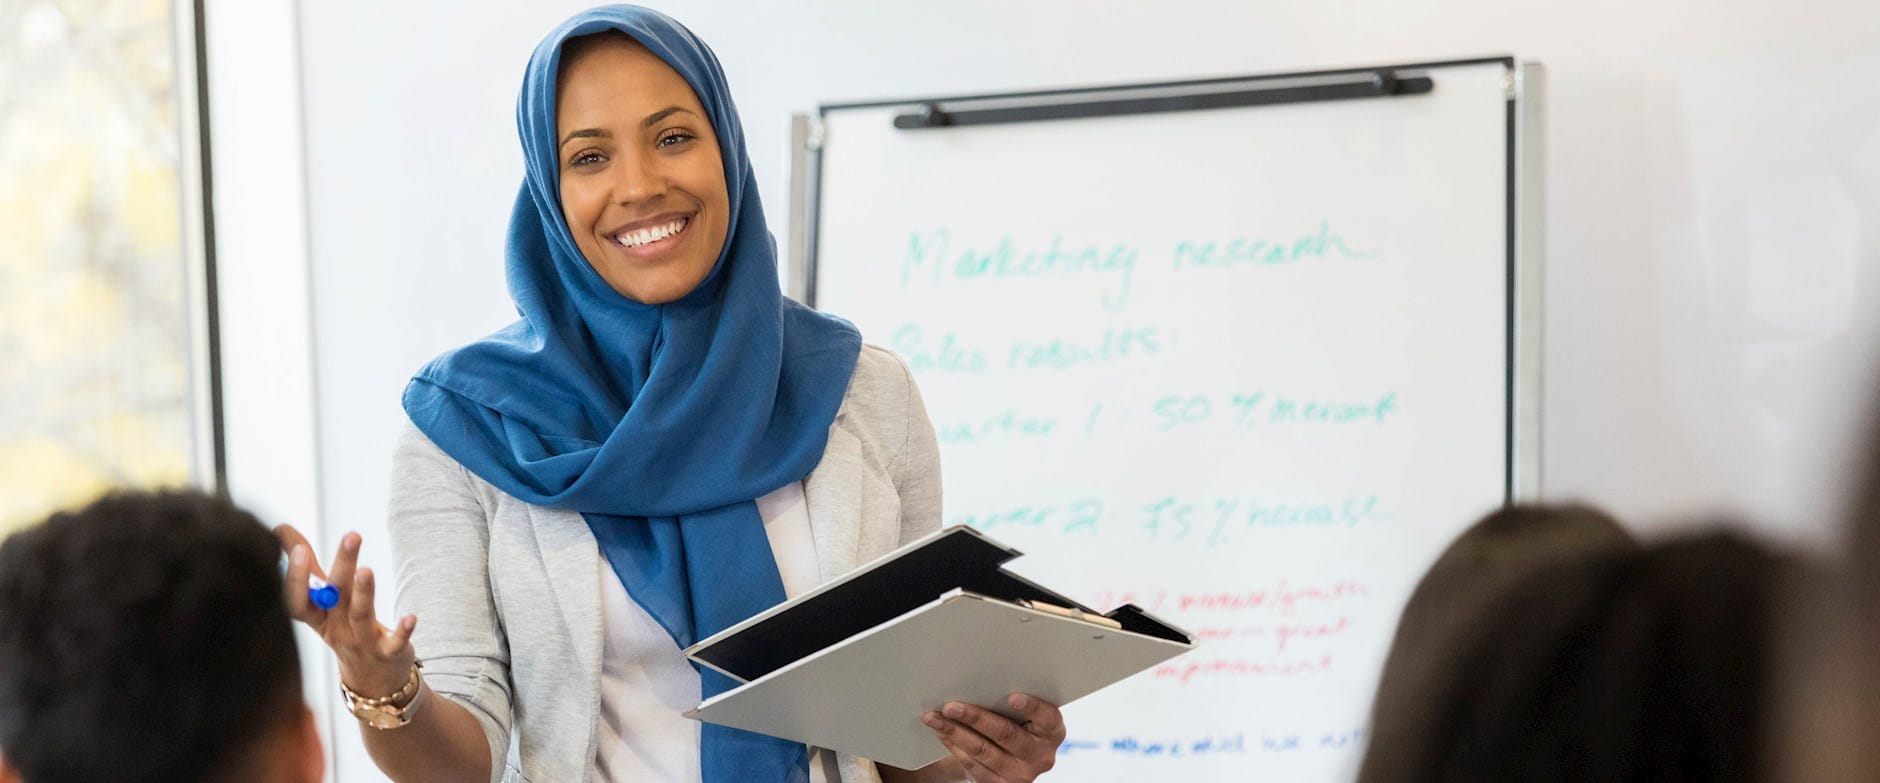 Smiling businesswoman in a blue hijab holding a clipboard in front of a dry erase board; she's talking with seated colleagues